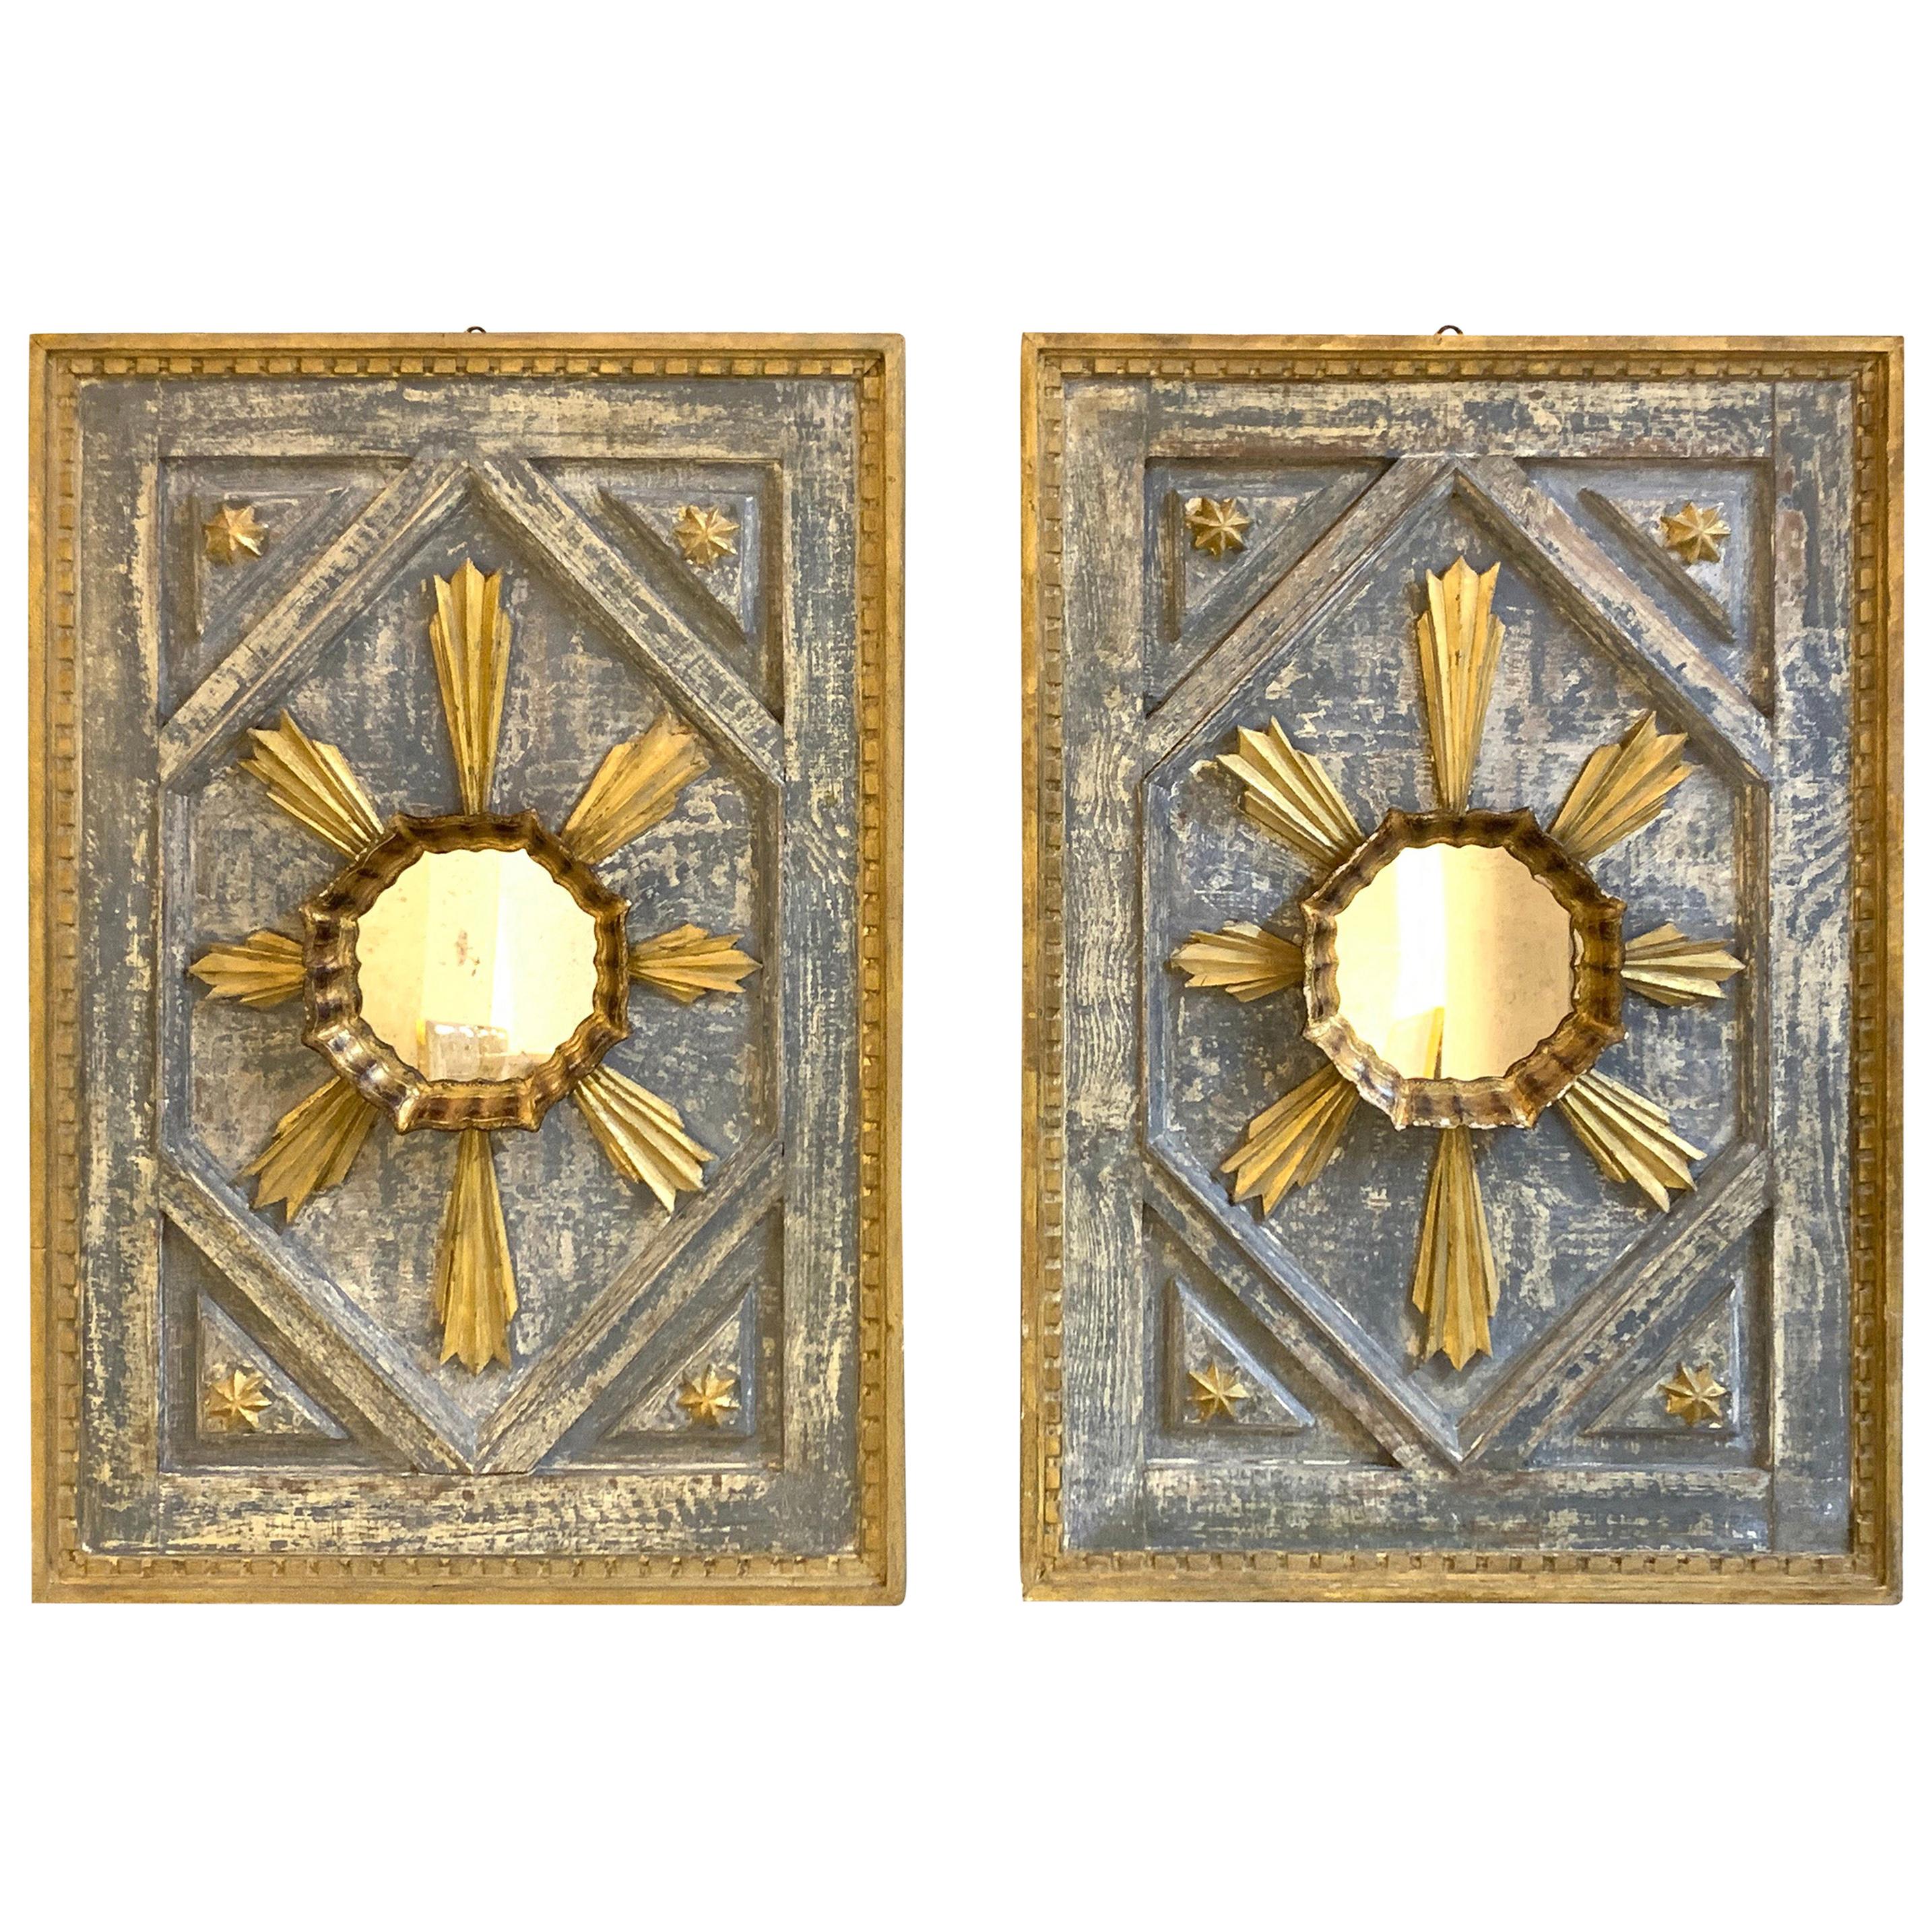 Pair of Italian Carved and Parcel Gilt Panels